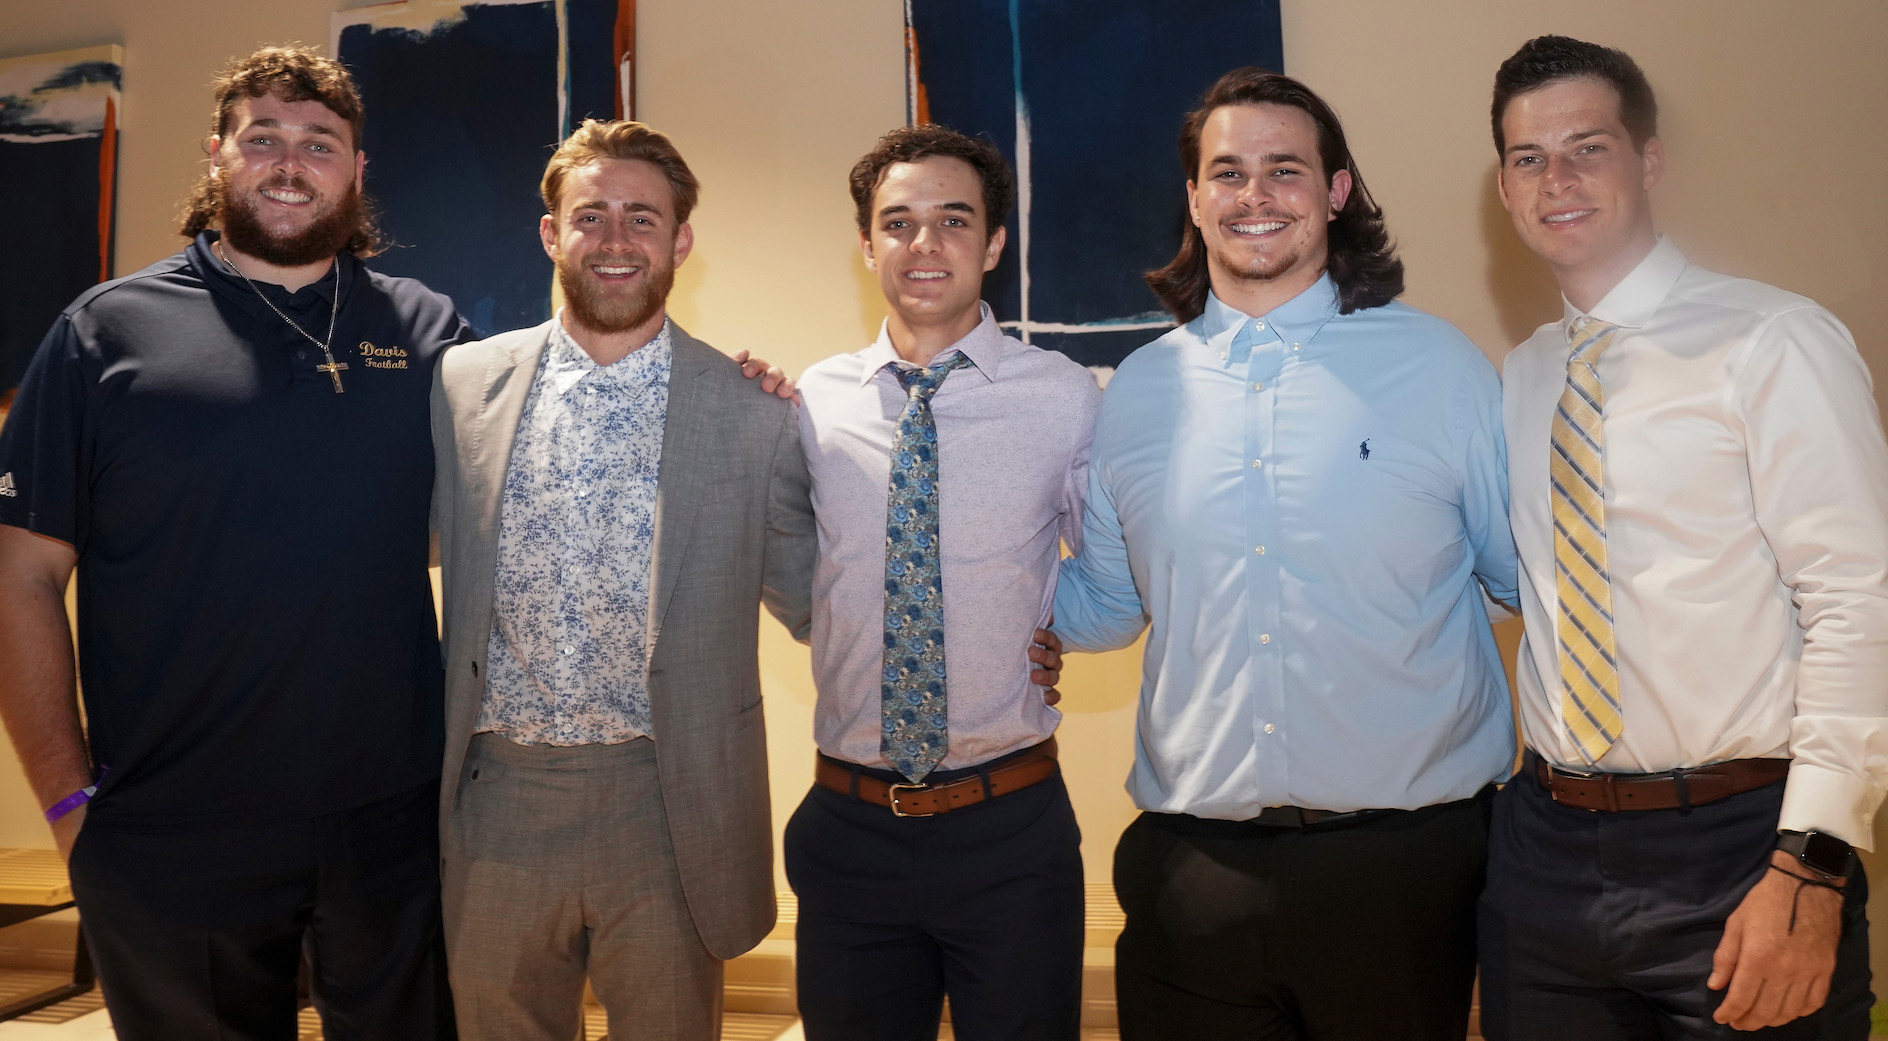 Five Aggie football players pose at the Shining Stars prom